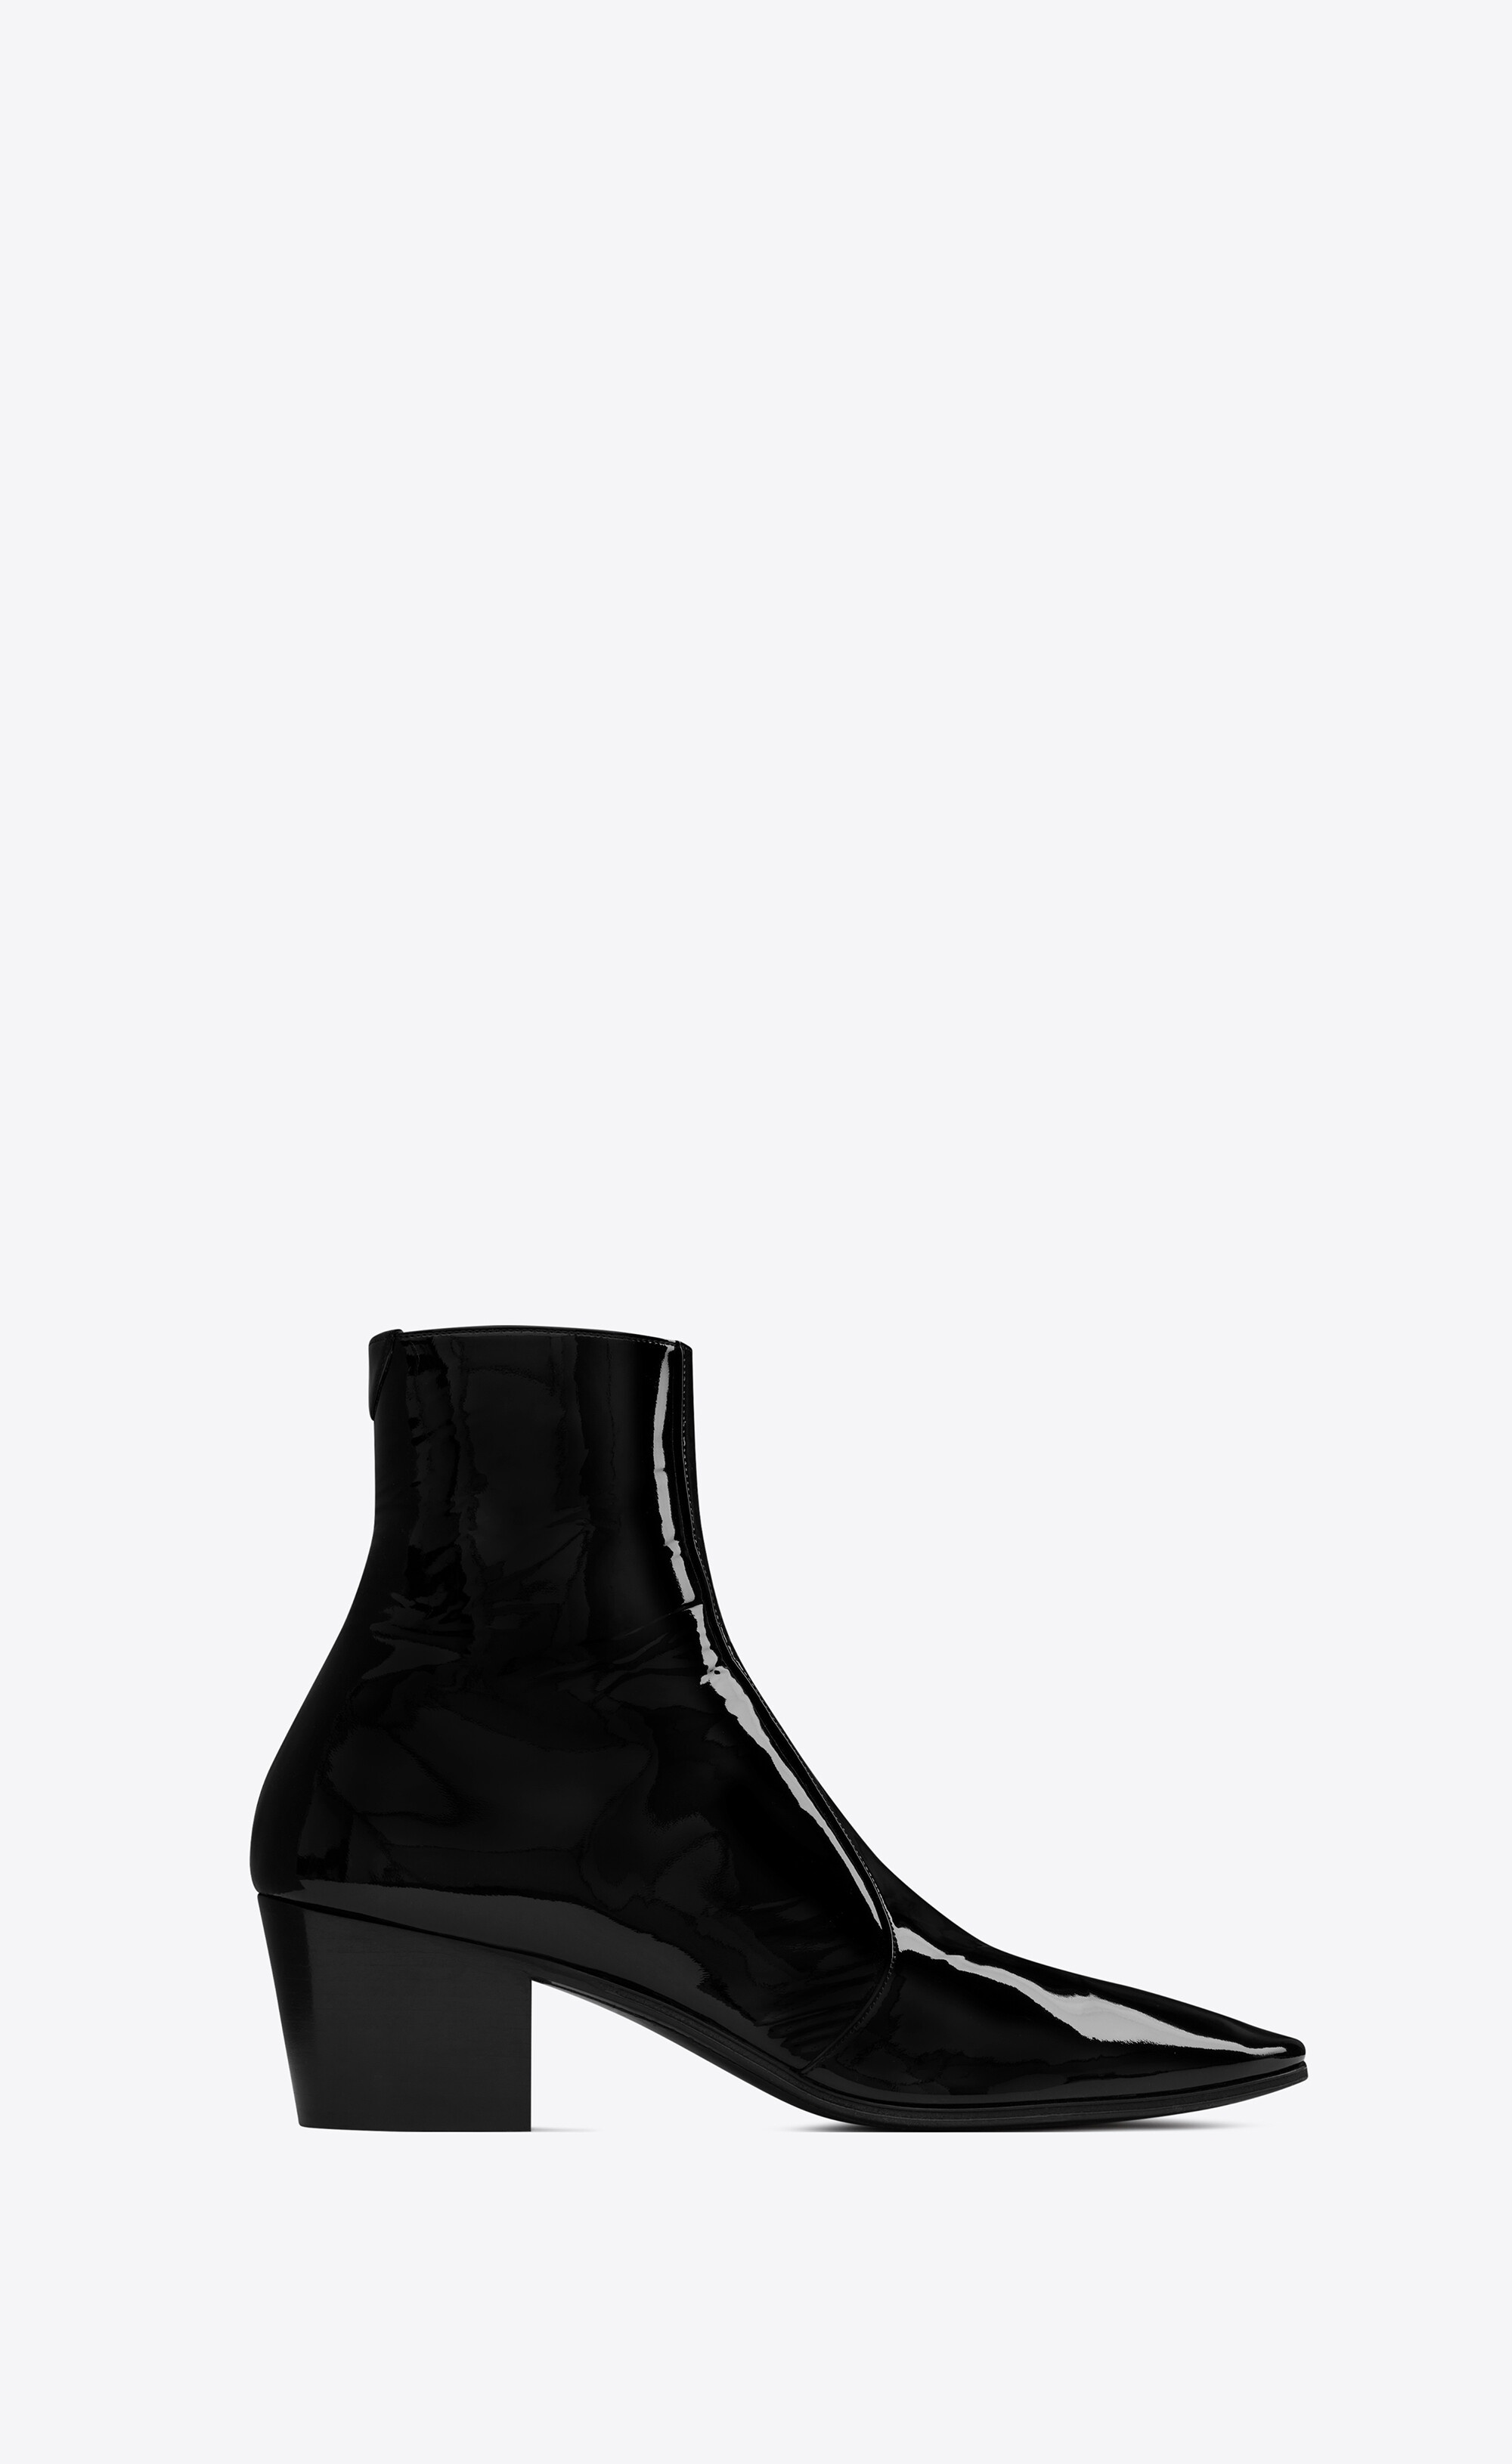 vassili zipped boots in patent leather - 1